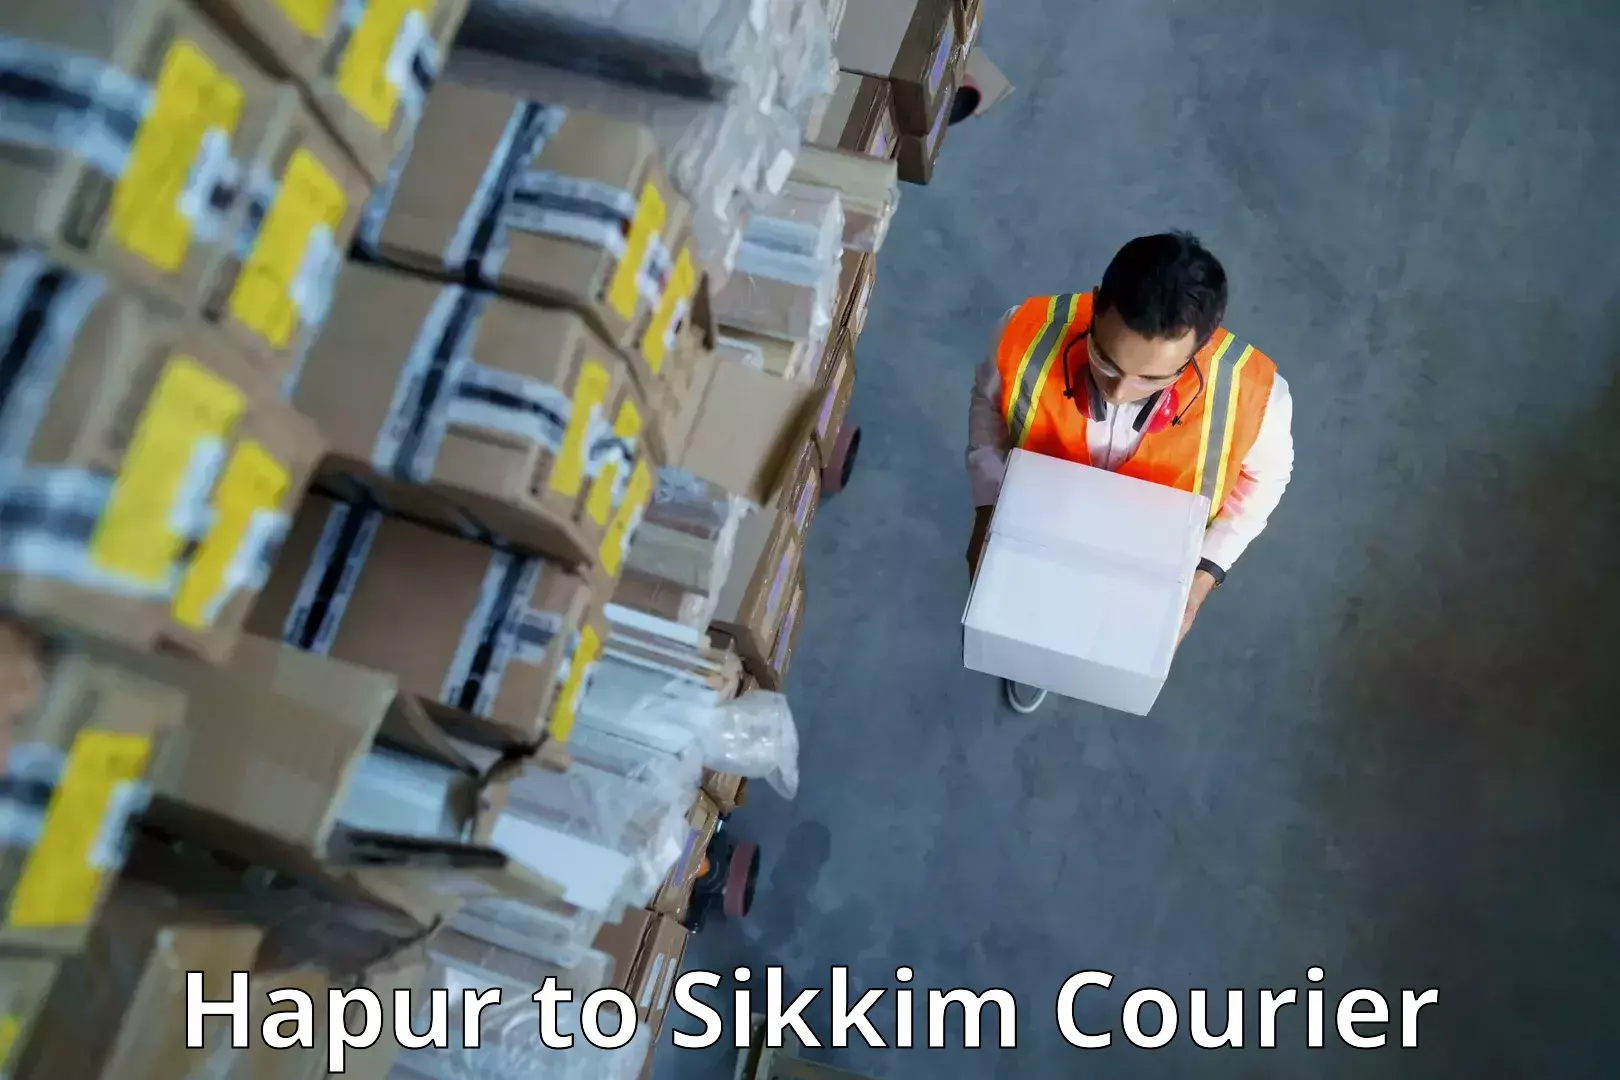 User-friendly delivery service Hapur to Sikkim